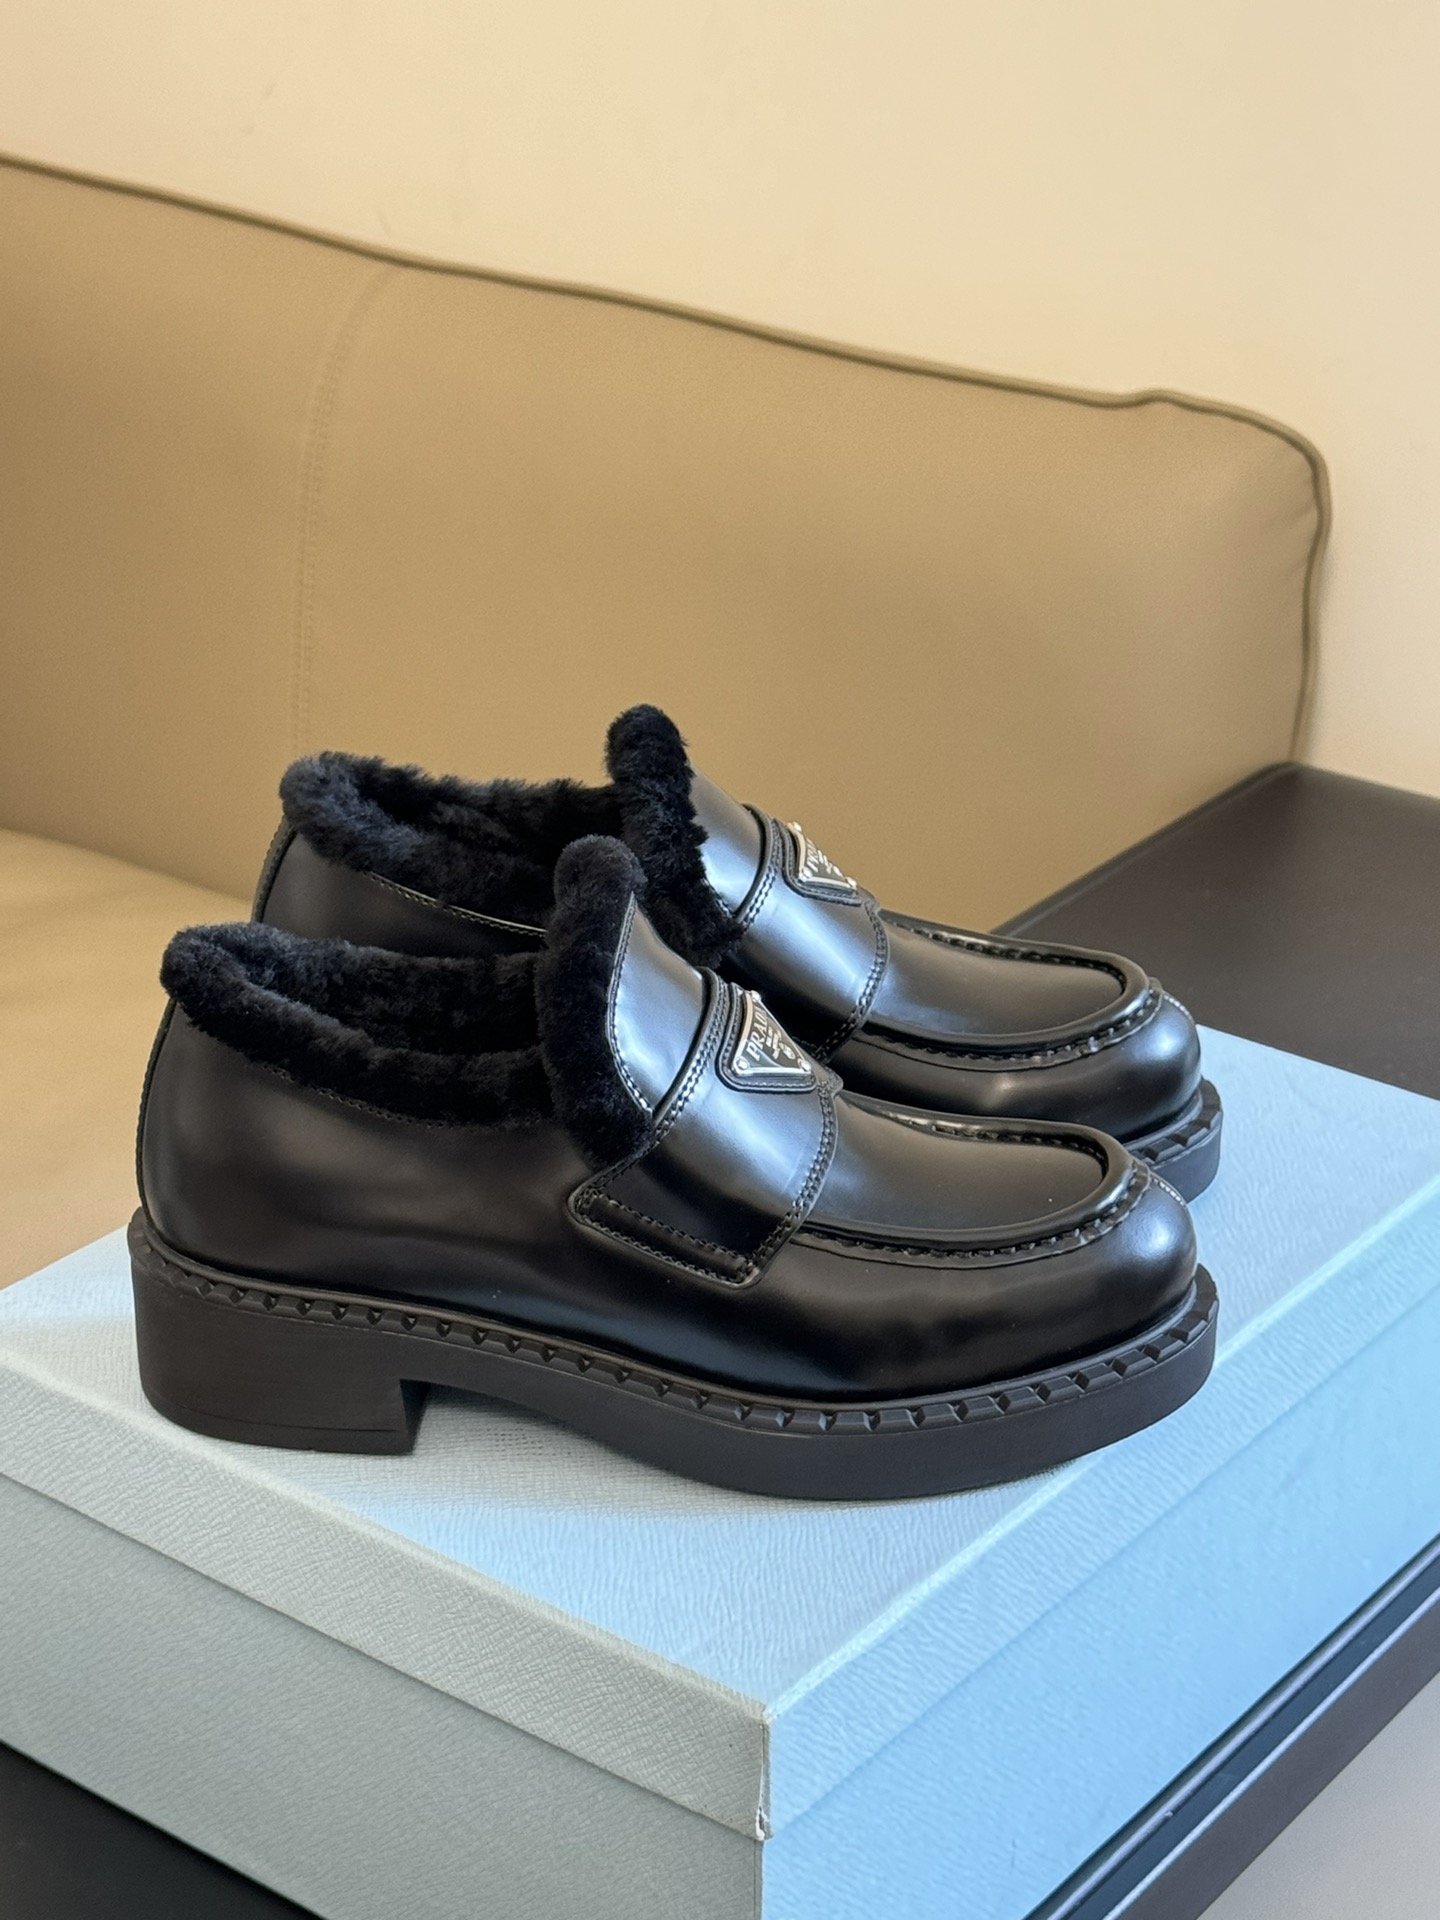 Prada Shoes Loafers Cowhide Wool Fall/Winter Collection